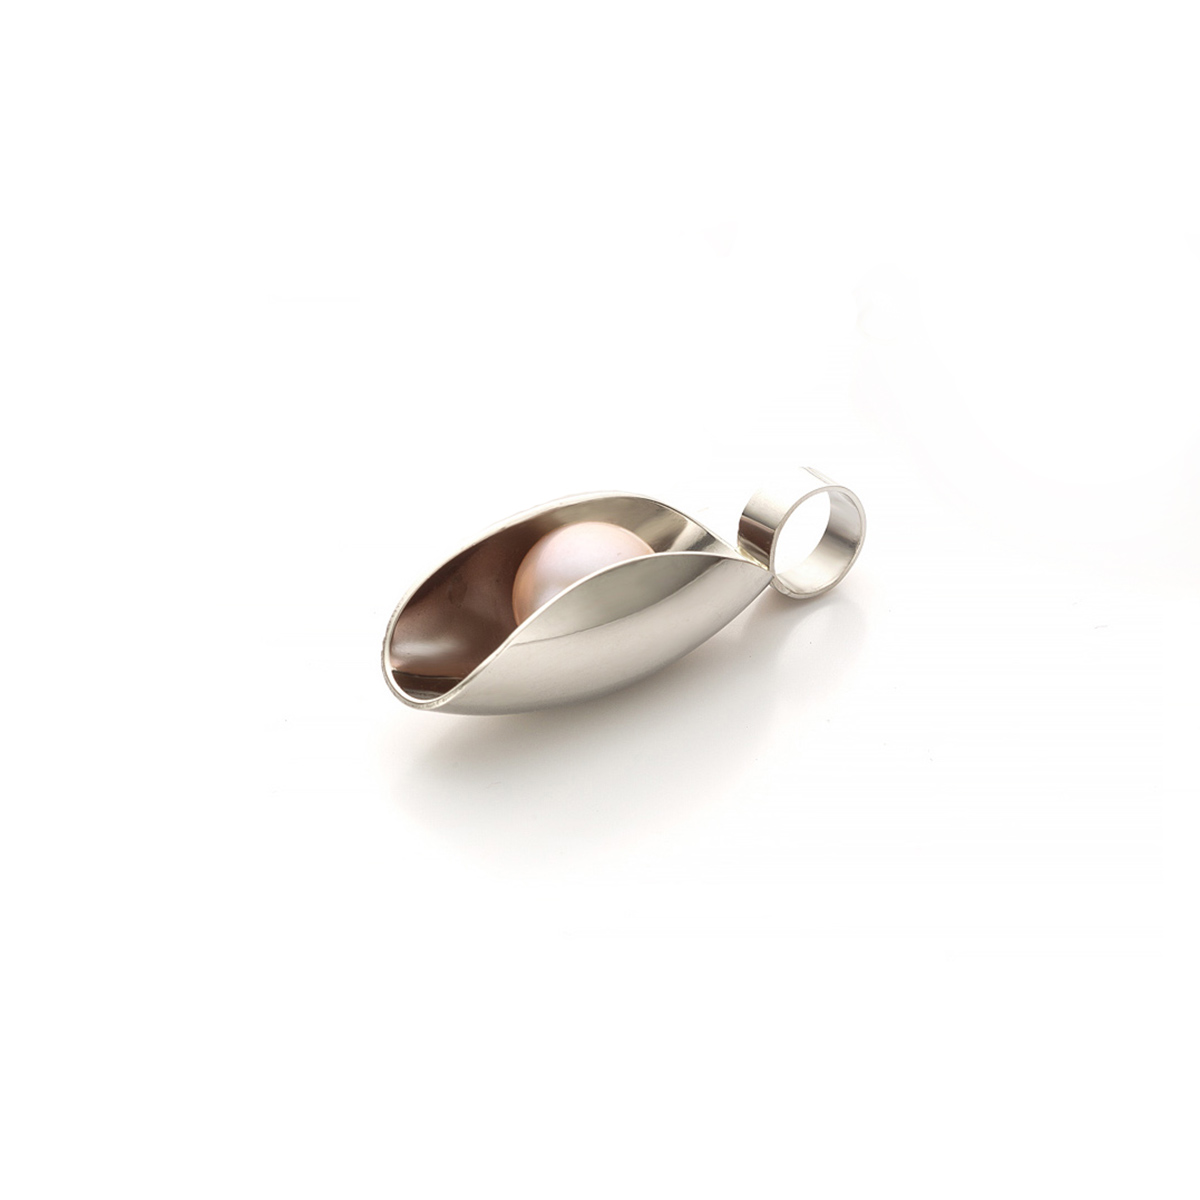 Oyster pendant white gold